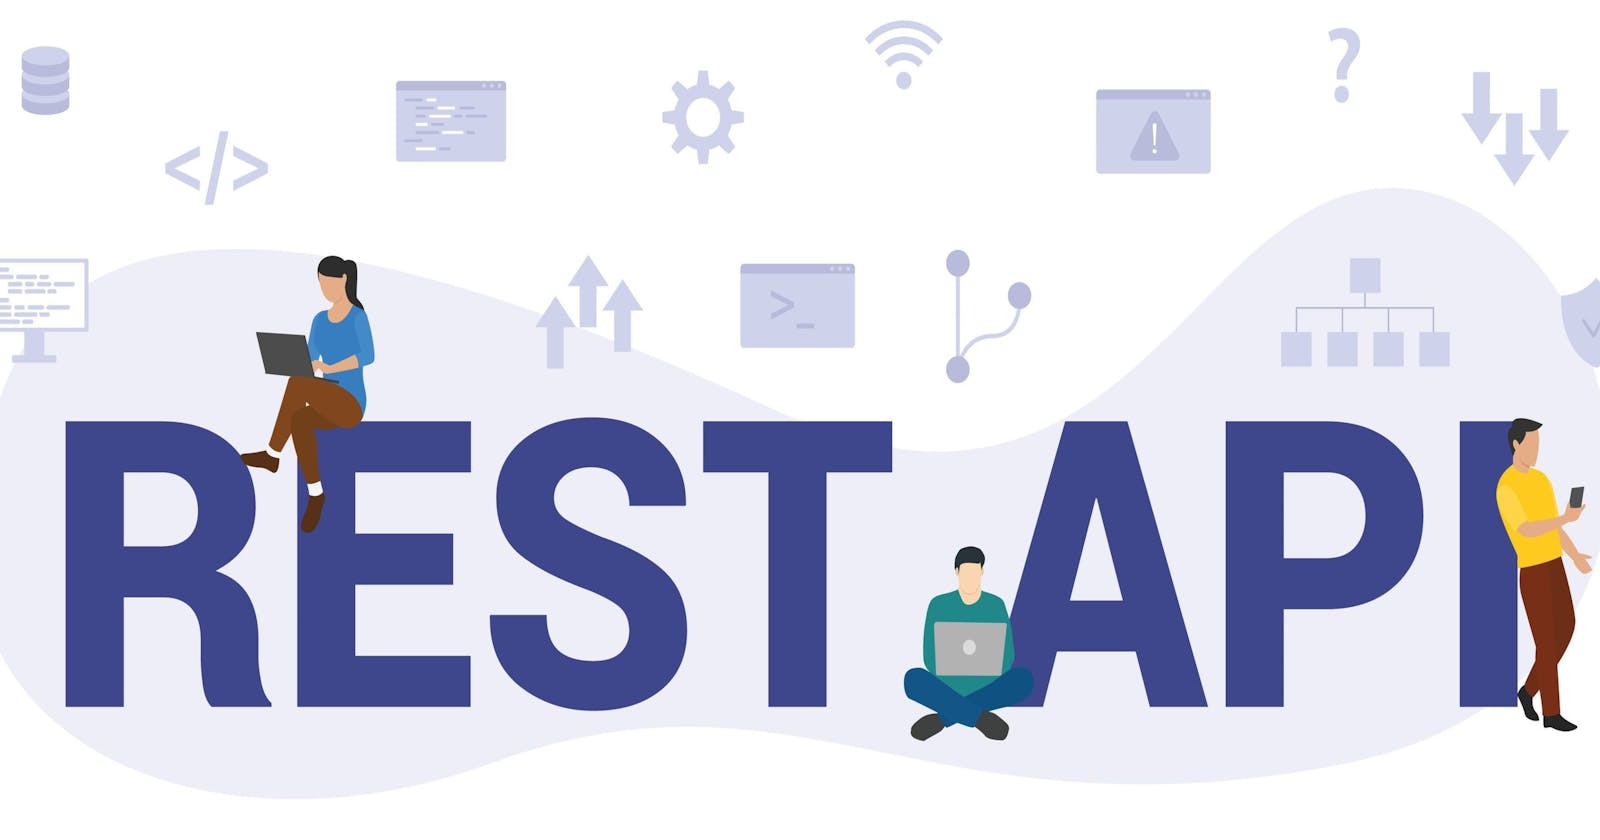 How to build a REST API in JavaScript